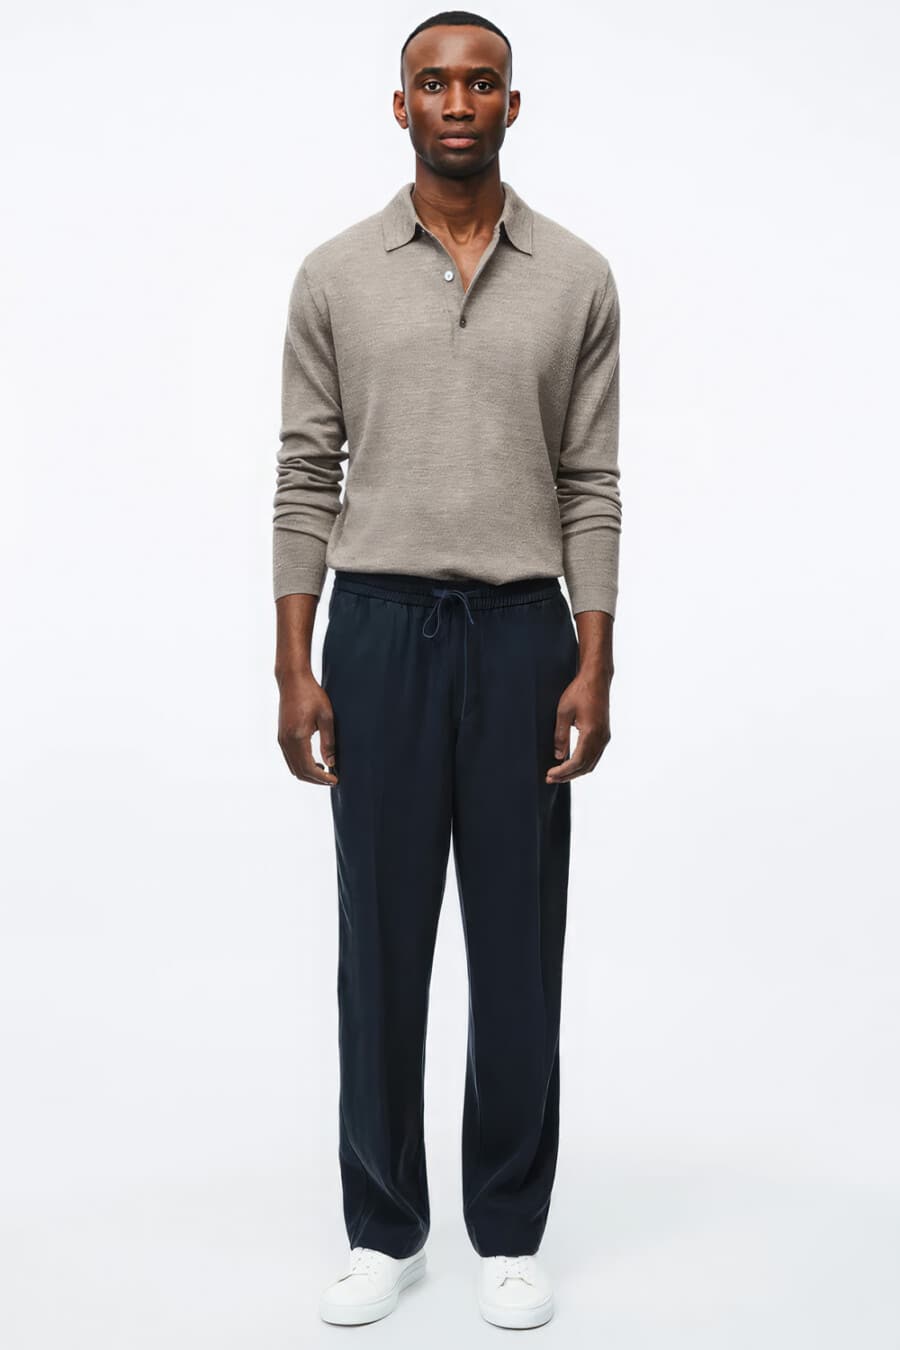 Men's navy drawstring pants, long-sleeve knitted grey polo shirt and white sneakers outfit